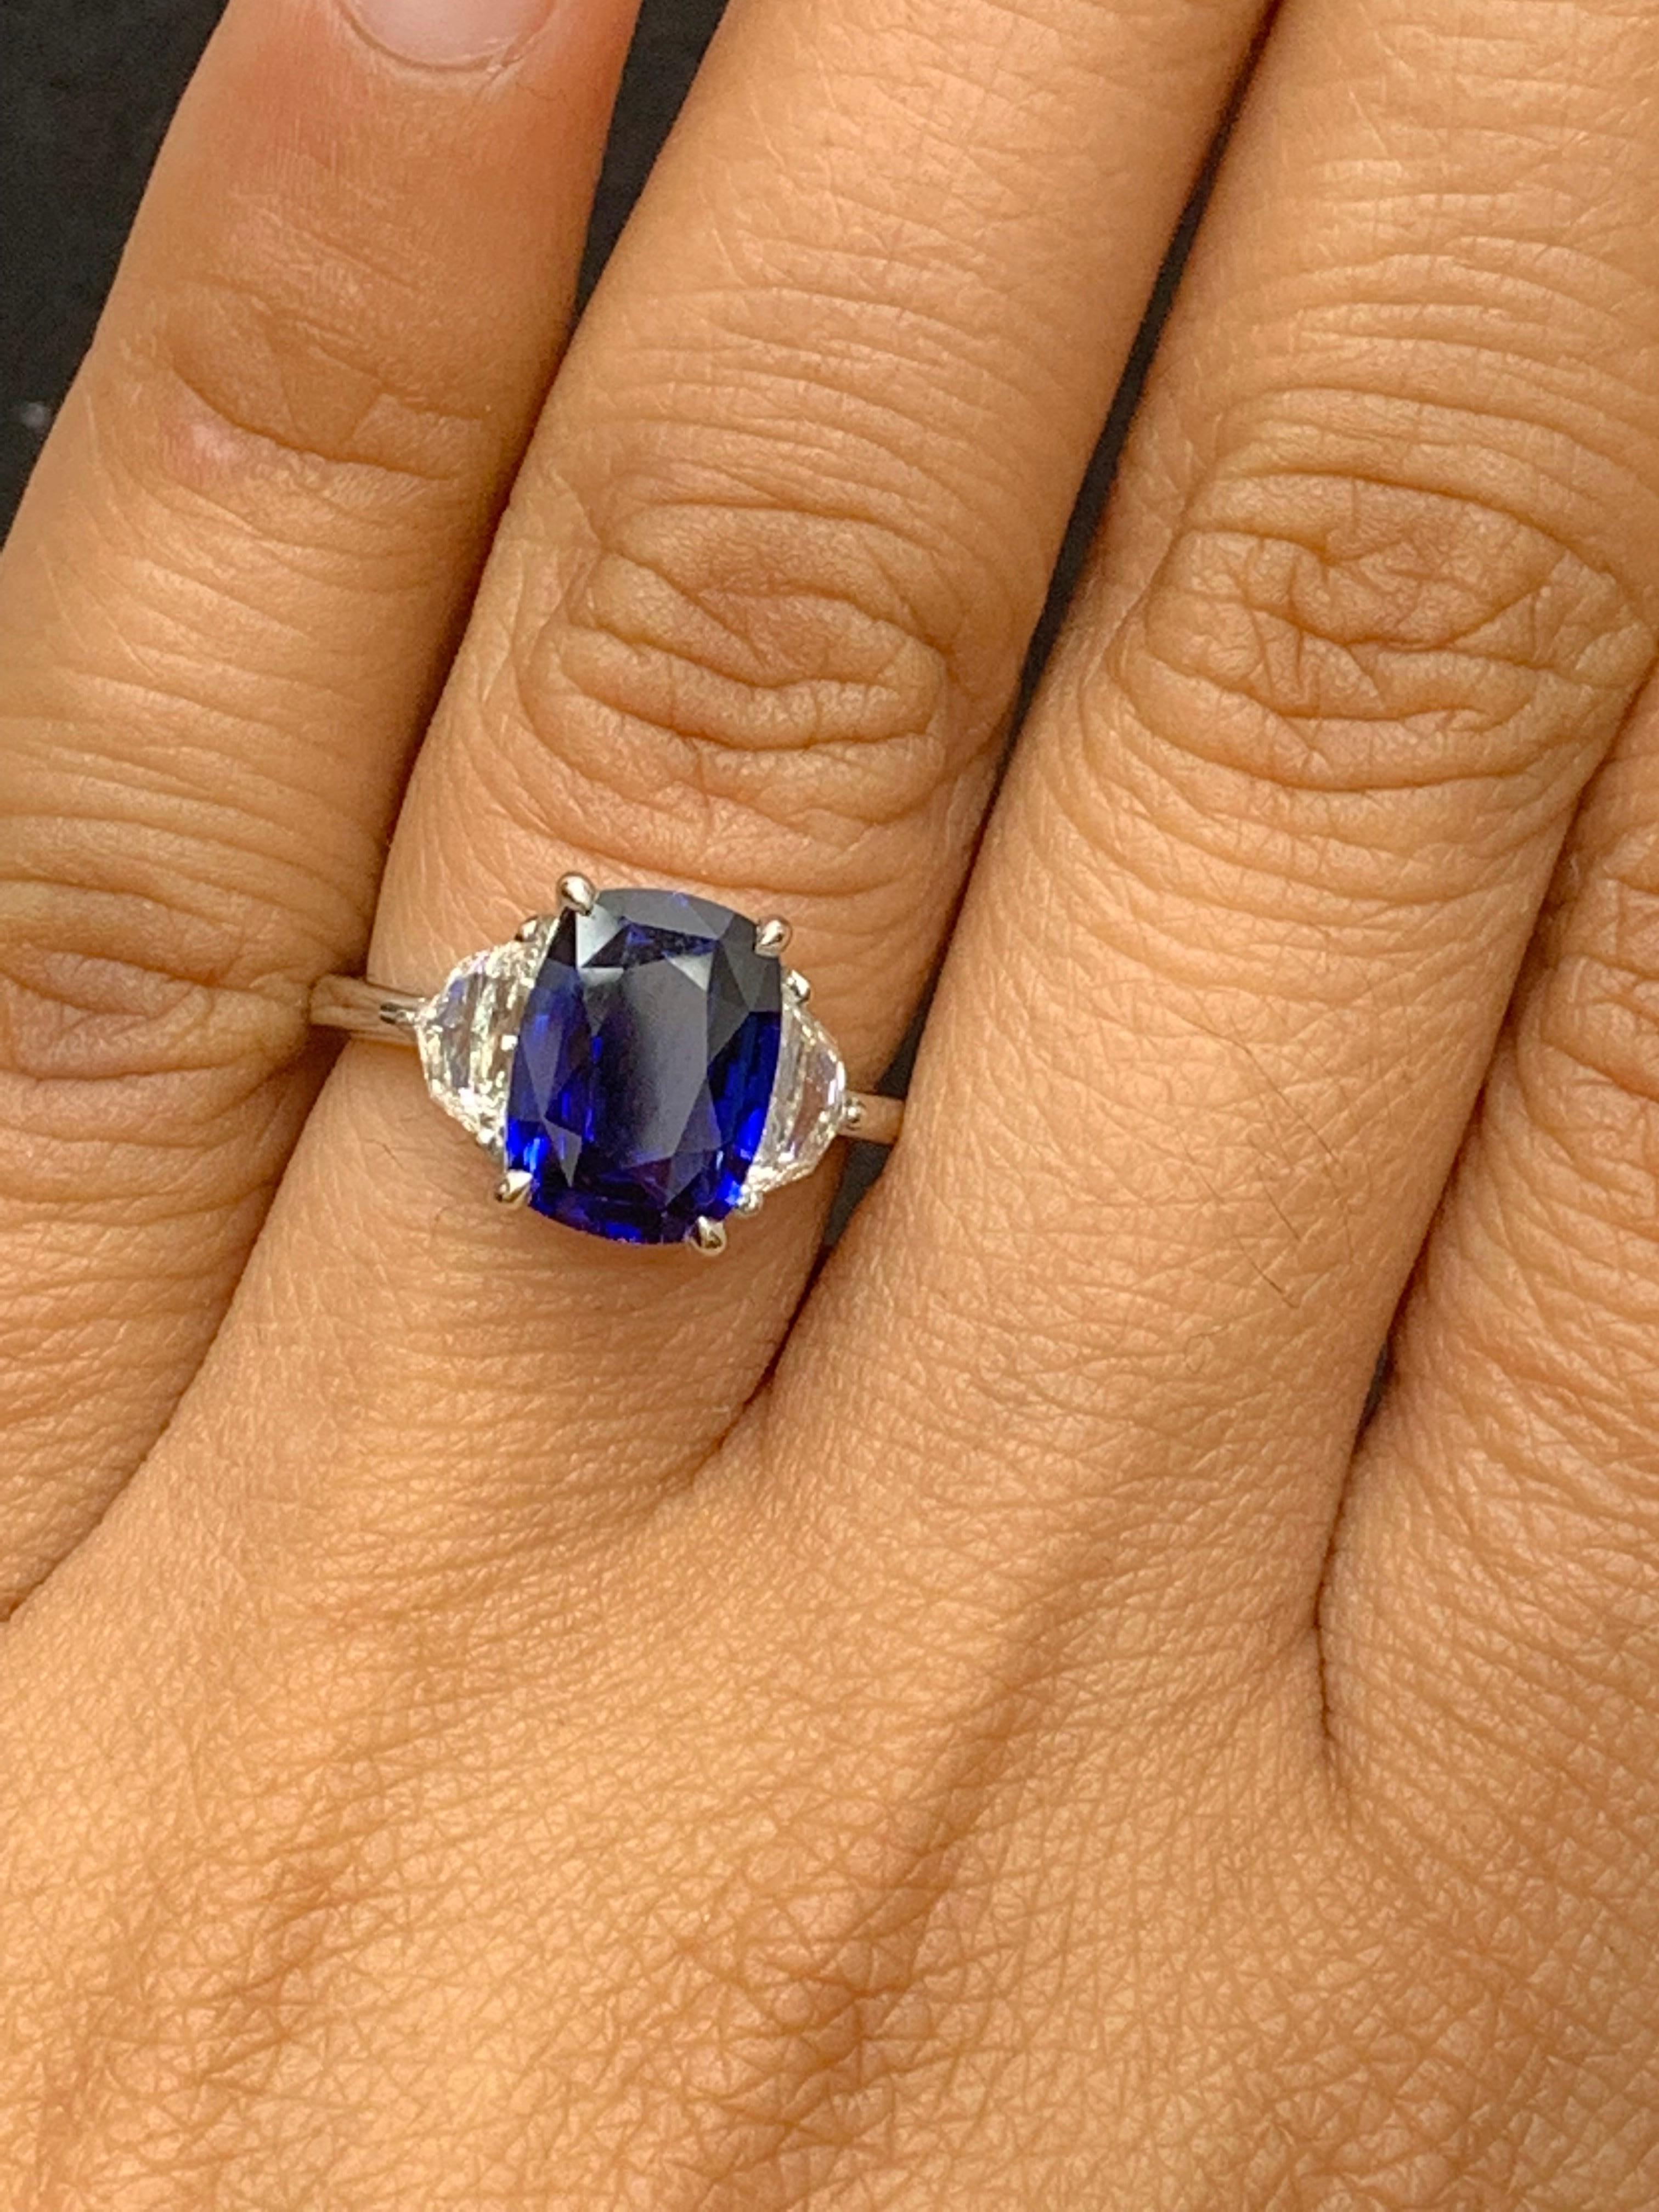 Certified 3.54 Carat Cushion Cut Blue Sapphire Diamond 3-Stone Ring in Platinum For Sale 11